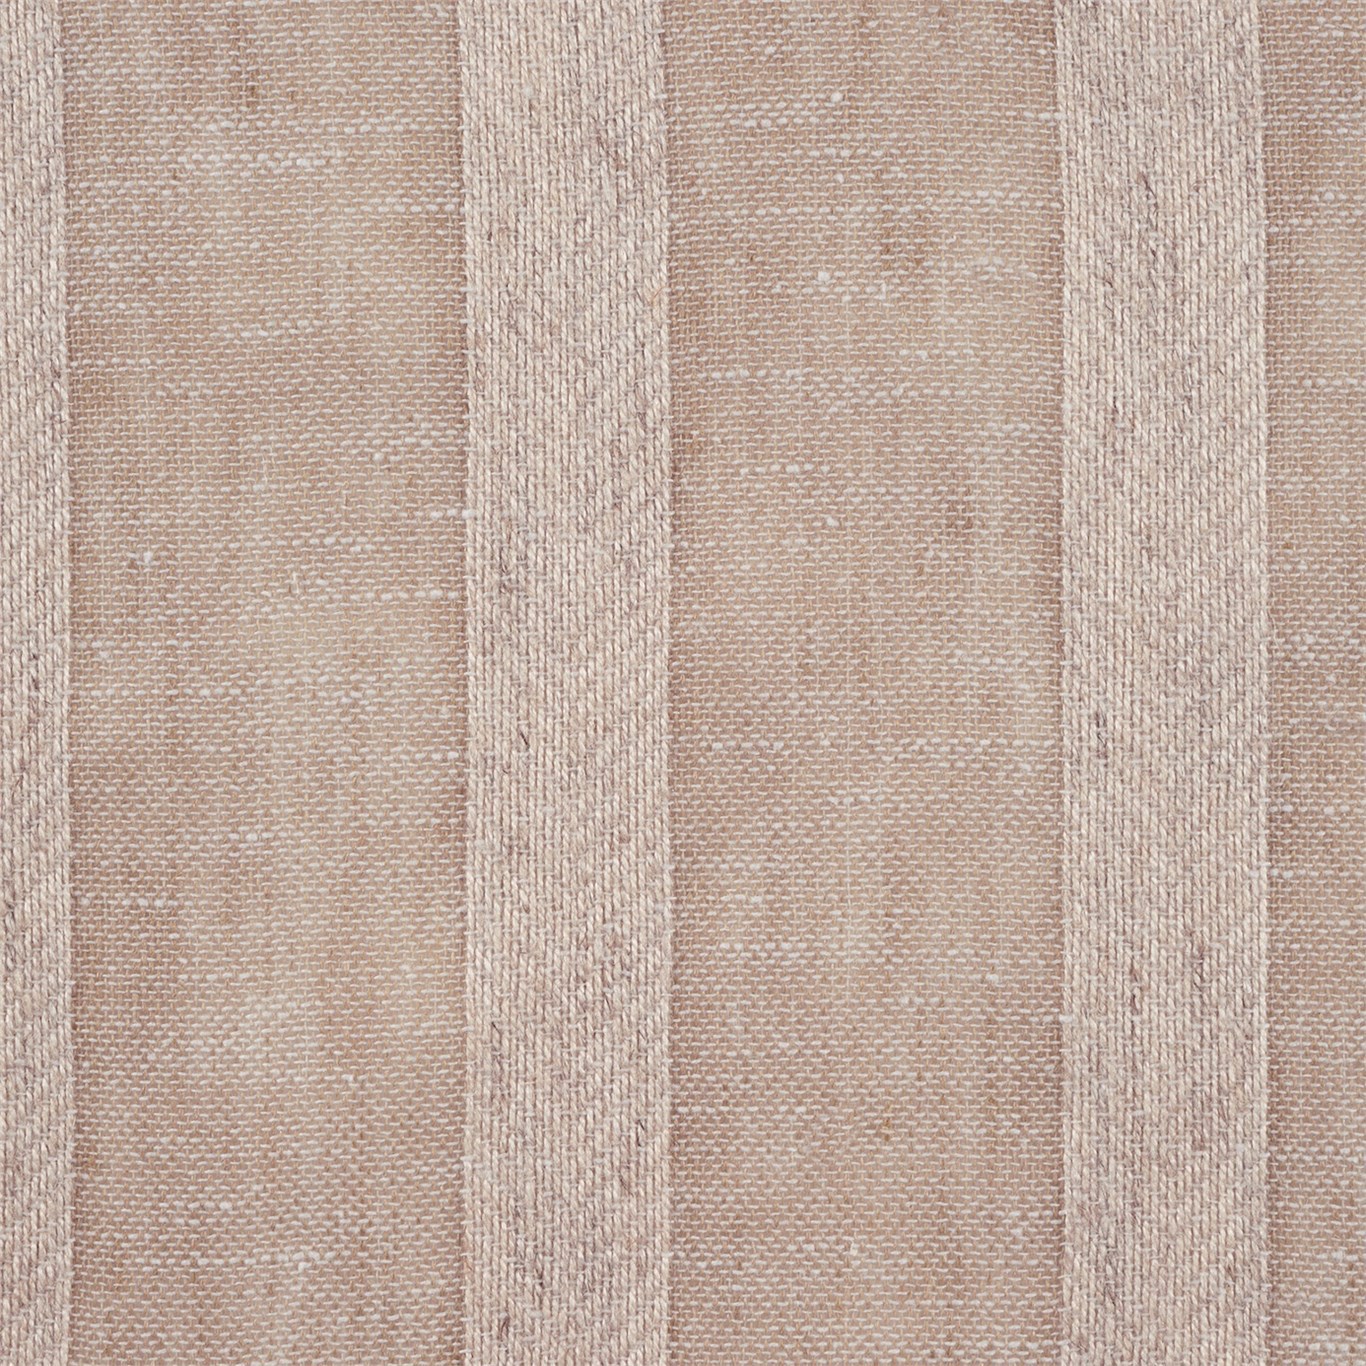 Purity Voiles Latte/Pearl Fabric by HAR